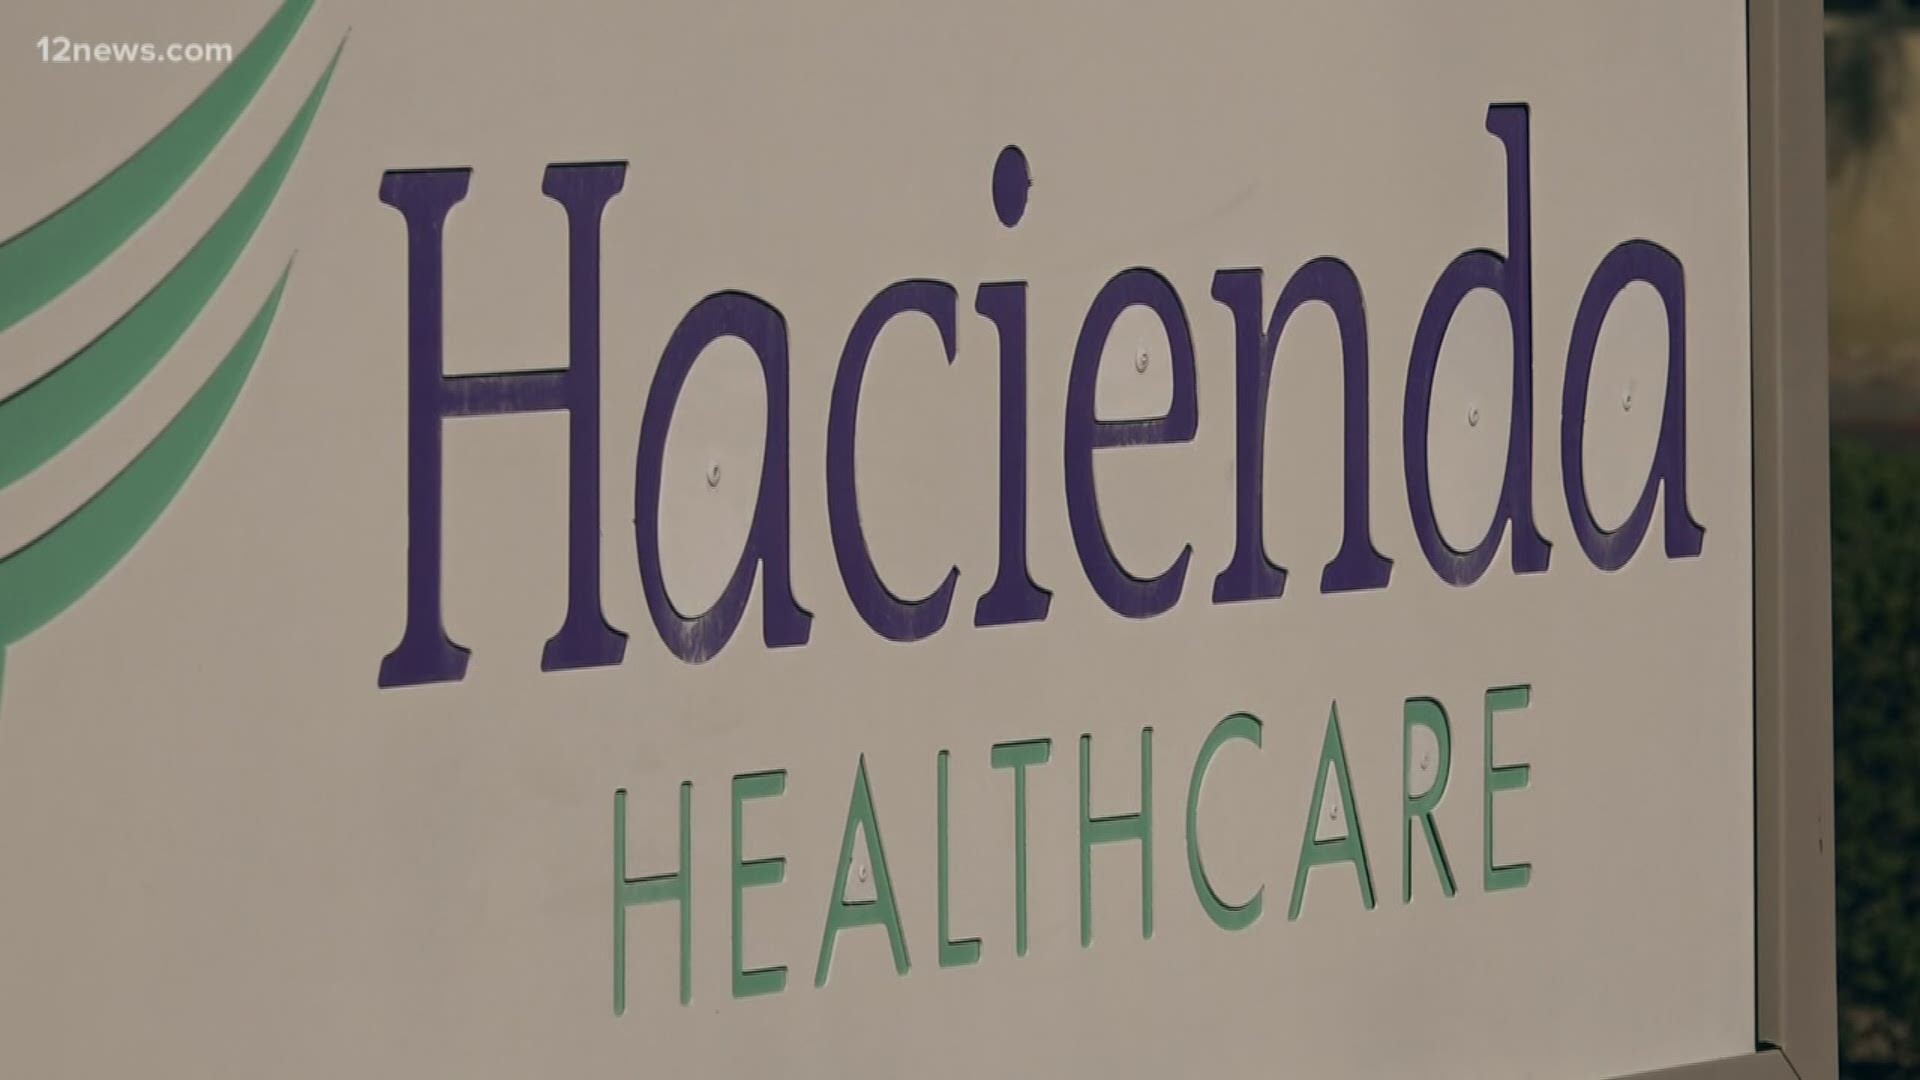 Families of patients still at Hacienda Healthcare, the facility where a woman with severe intellectual disabilities was raped and impregnated by a nurse, are relieved that he has been caught. Now, they are questioning how the crime could have happened in the first place.